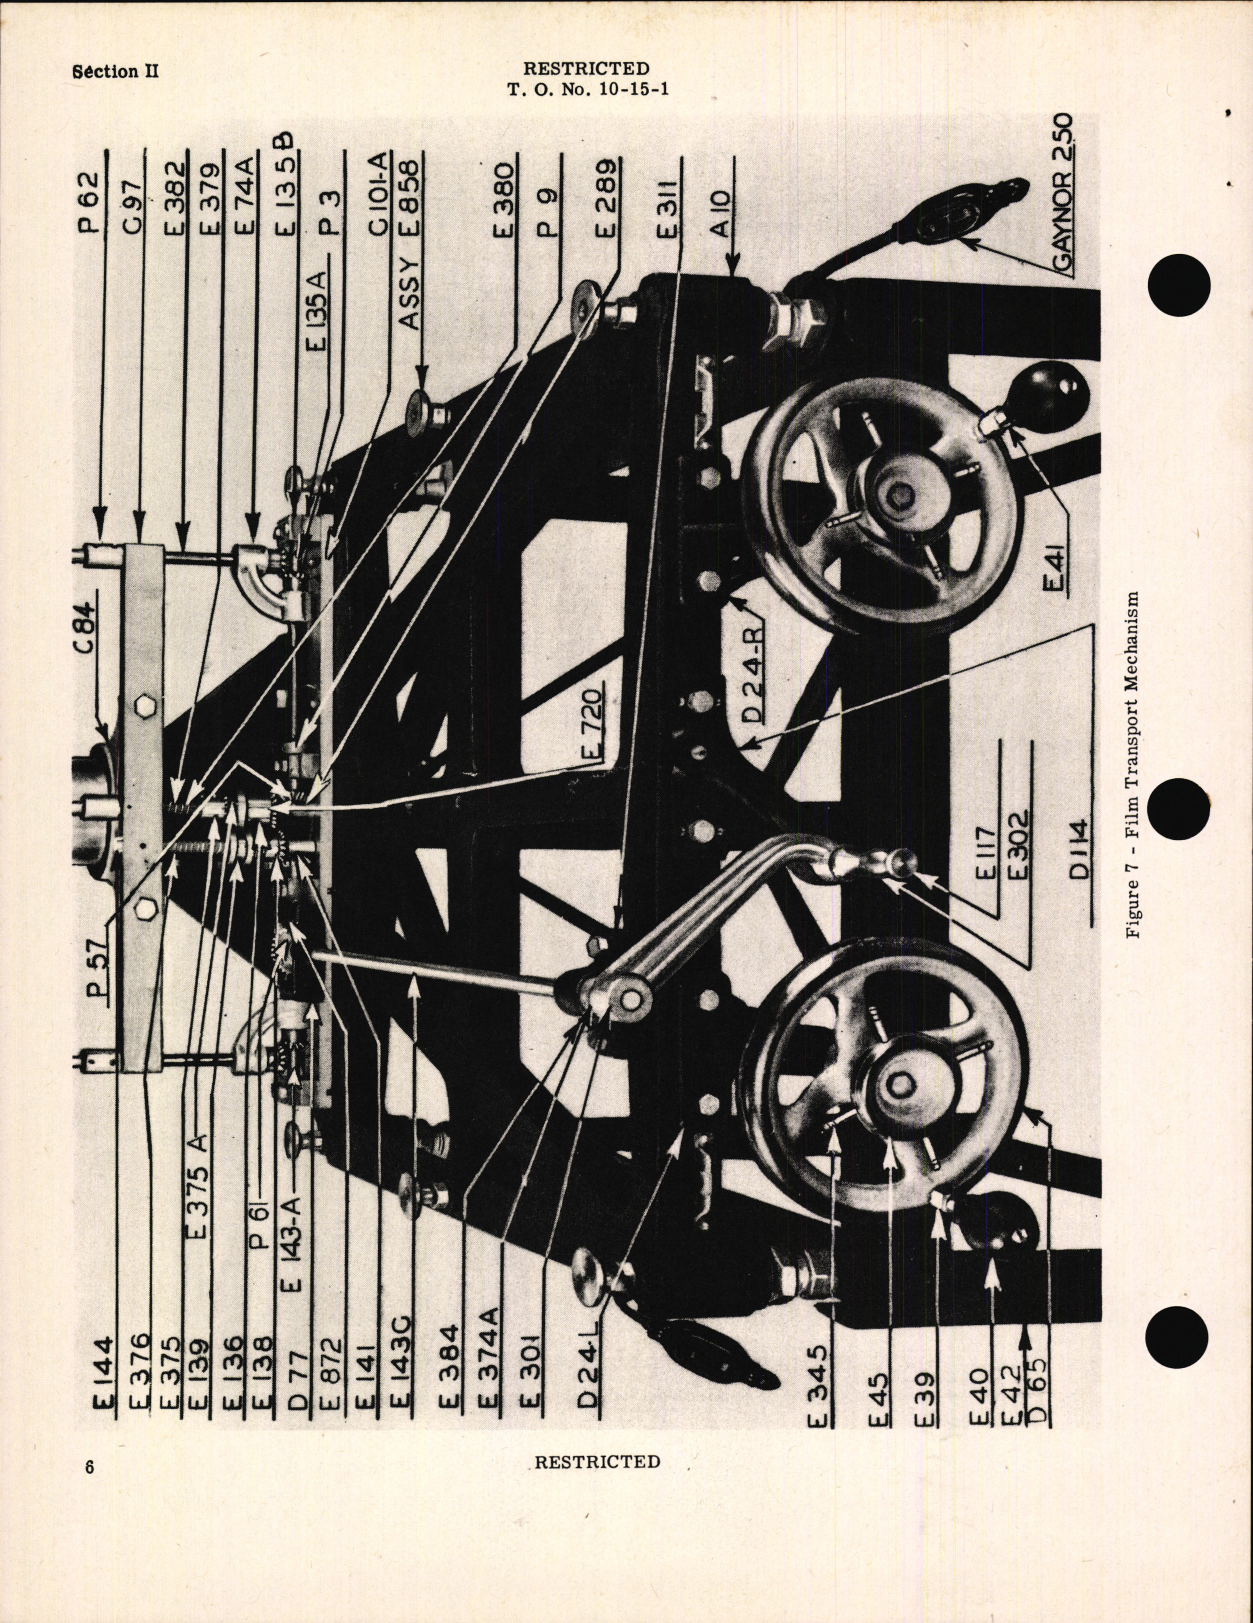 Sample page 8 from AirCorps Library document: Handbook of Instructions with Parts Catalog for Type B-9 Projection Printer